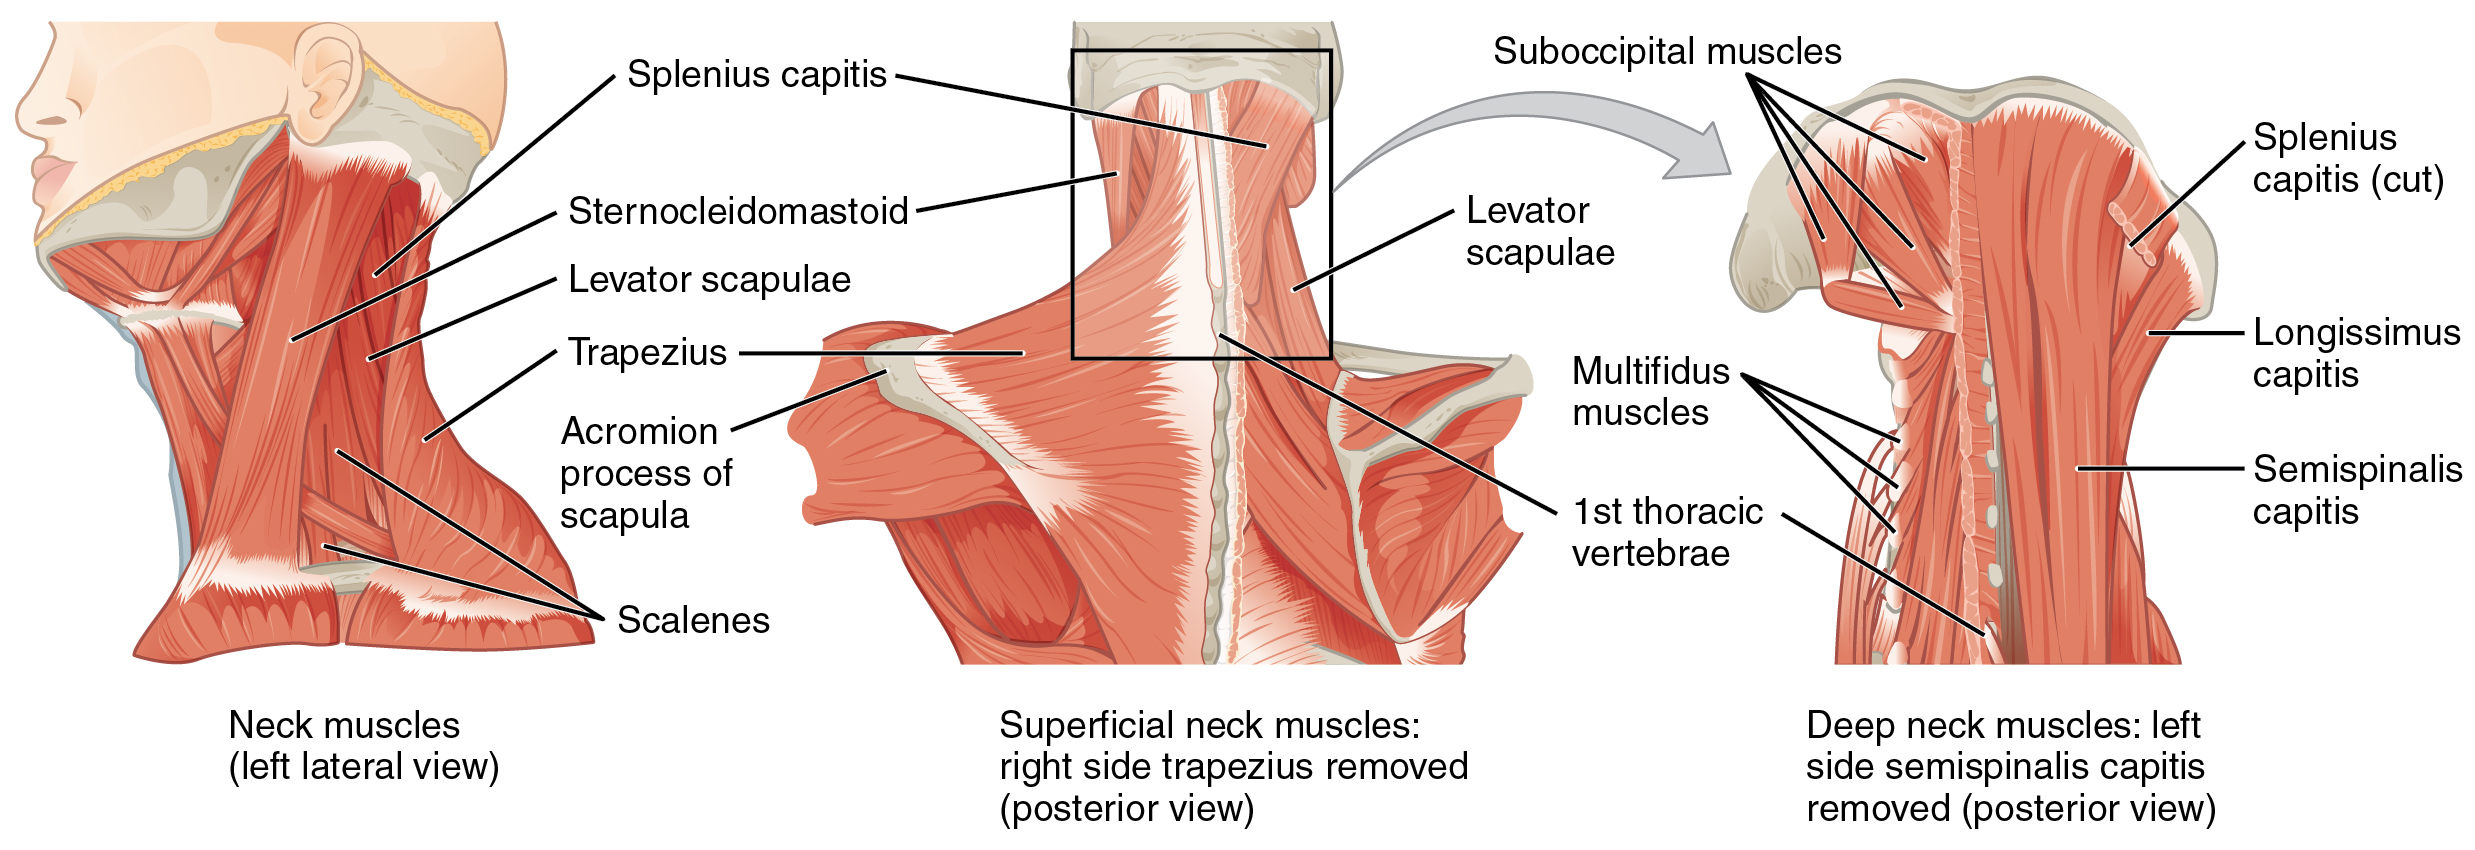 Axial Muscles of the Head, Neck, and Back \u2013 Anatomy and Physiology